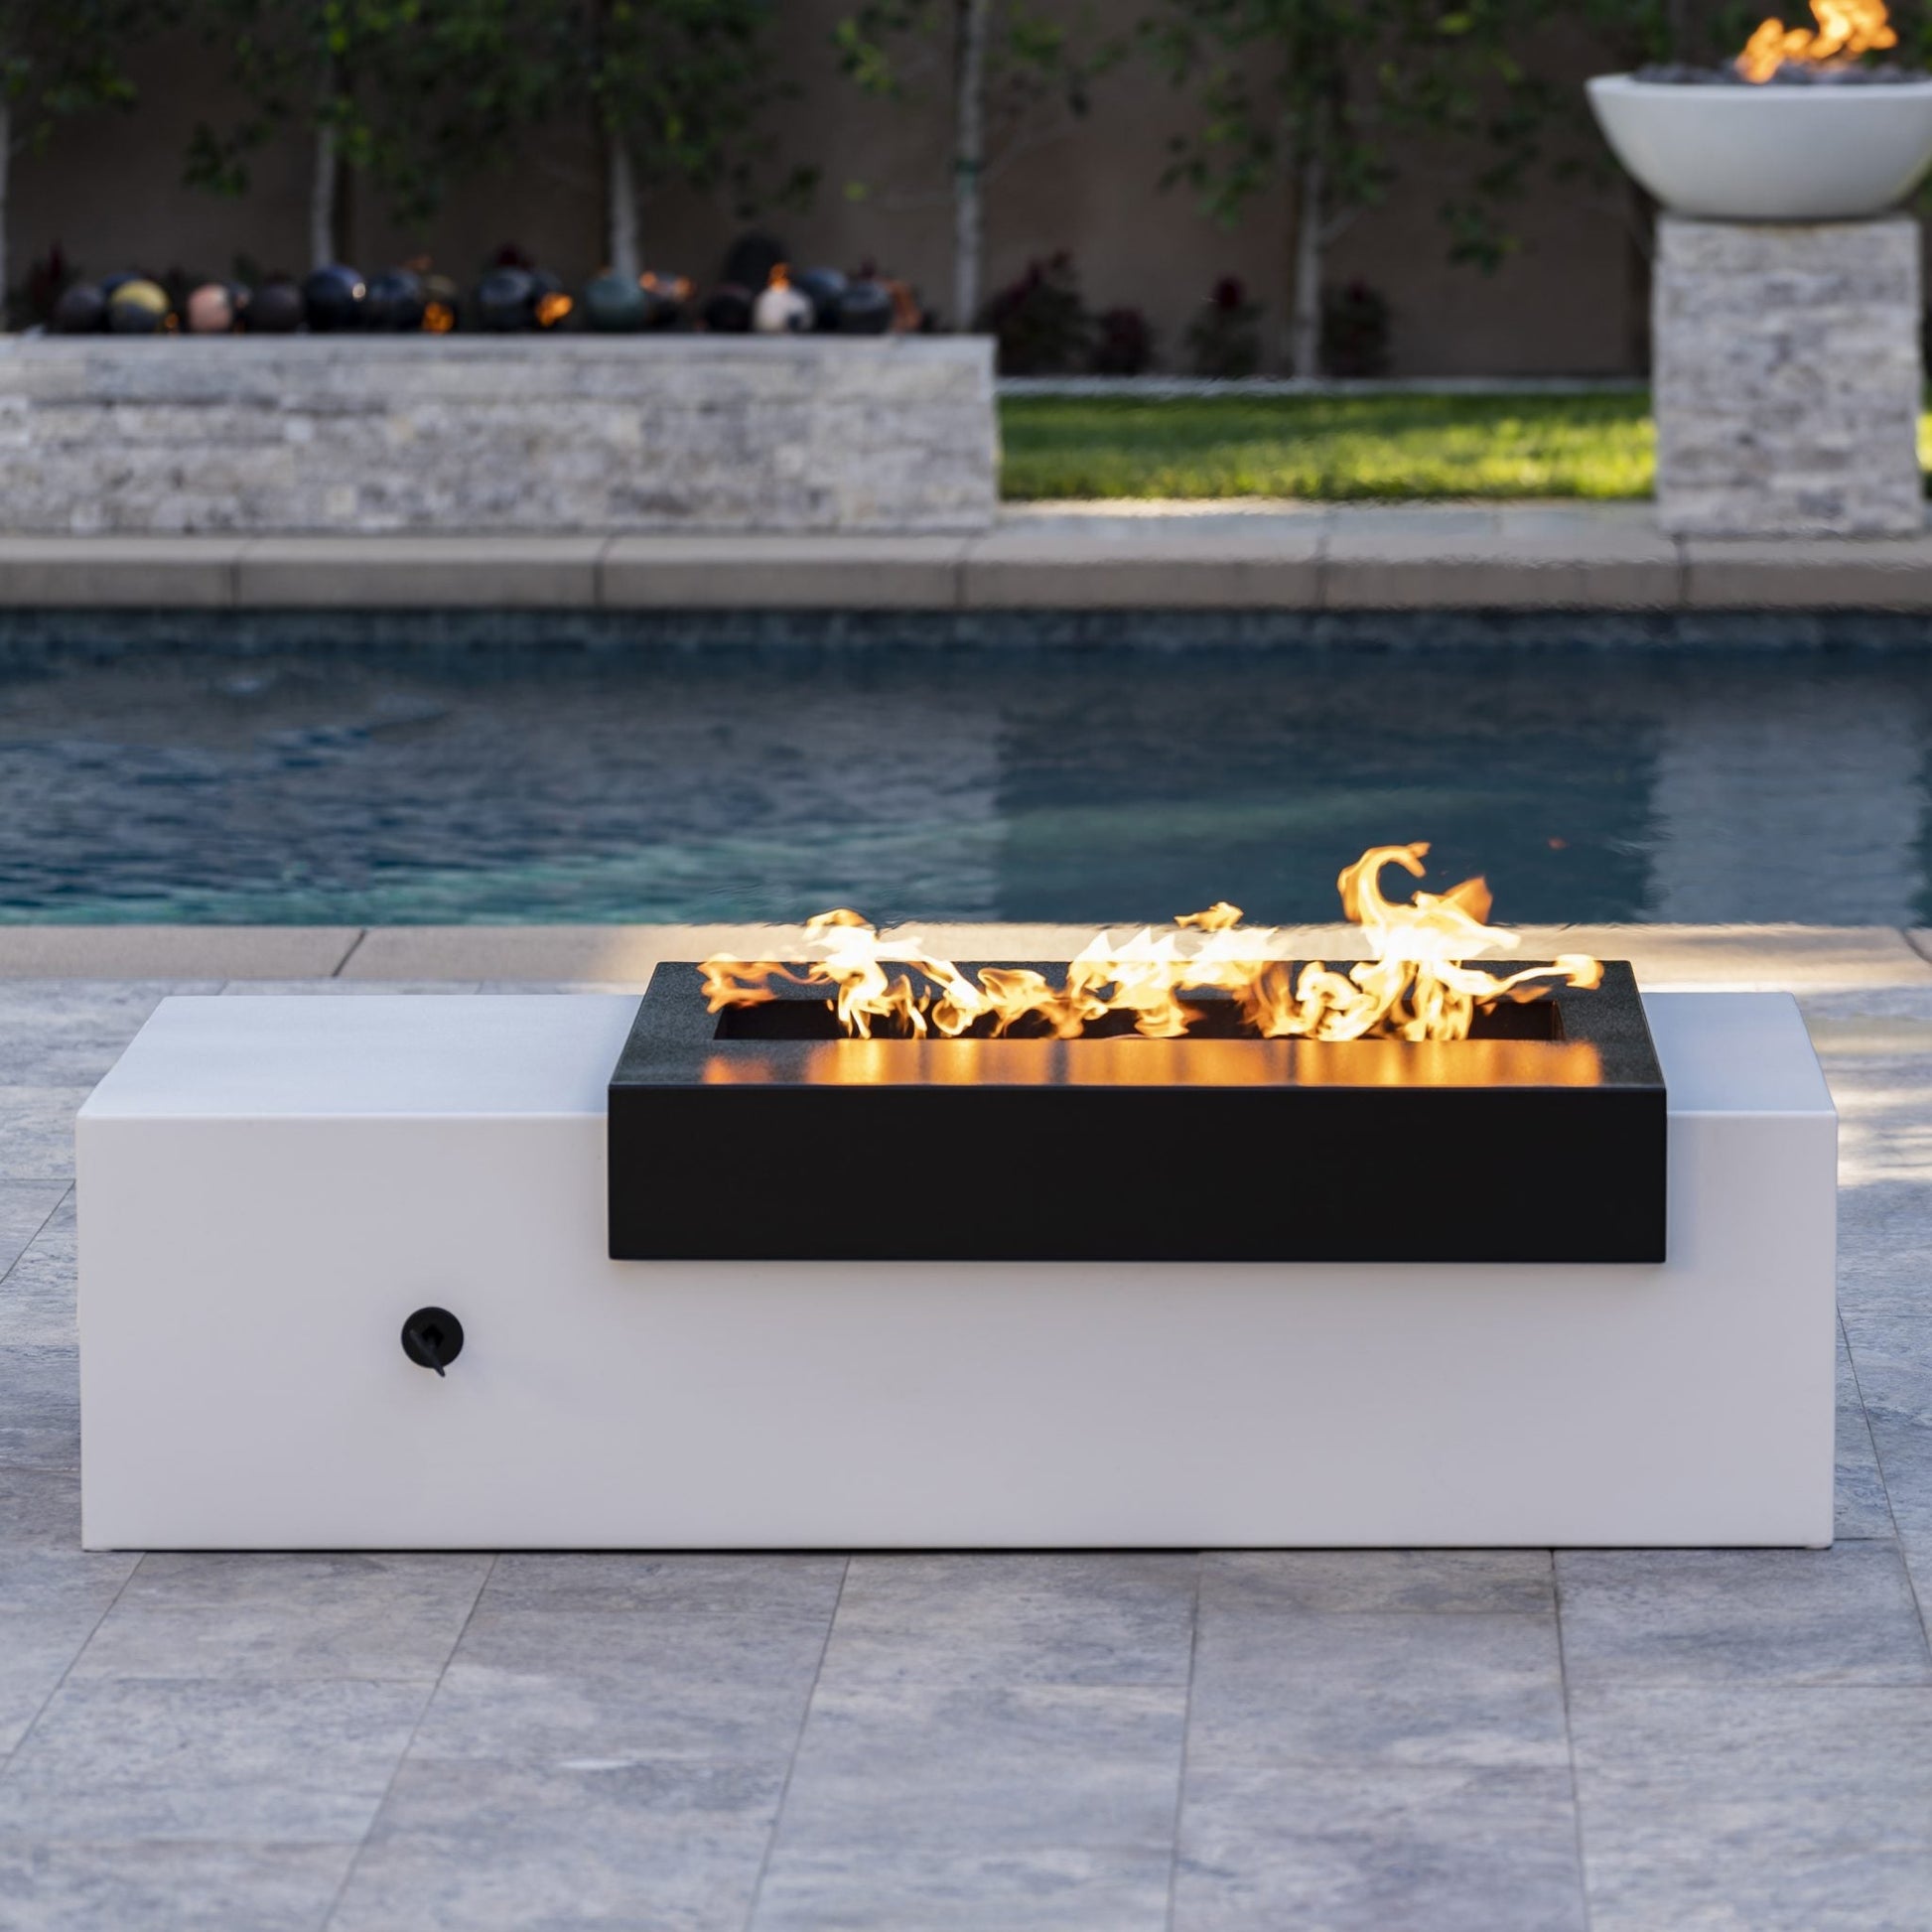 The Outdoor Plus Moonstone Black & White 60" Powder Coated Metal Fire Pit Propane Gas with 110V Electronic Ignition